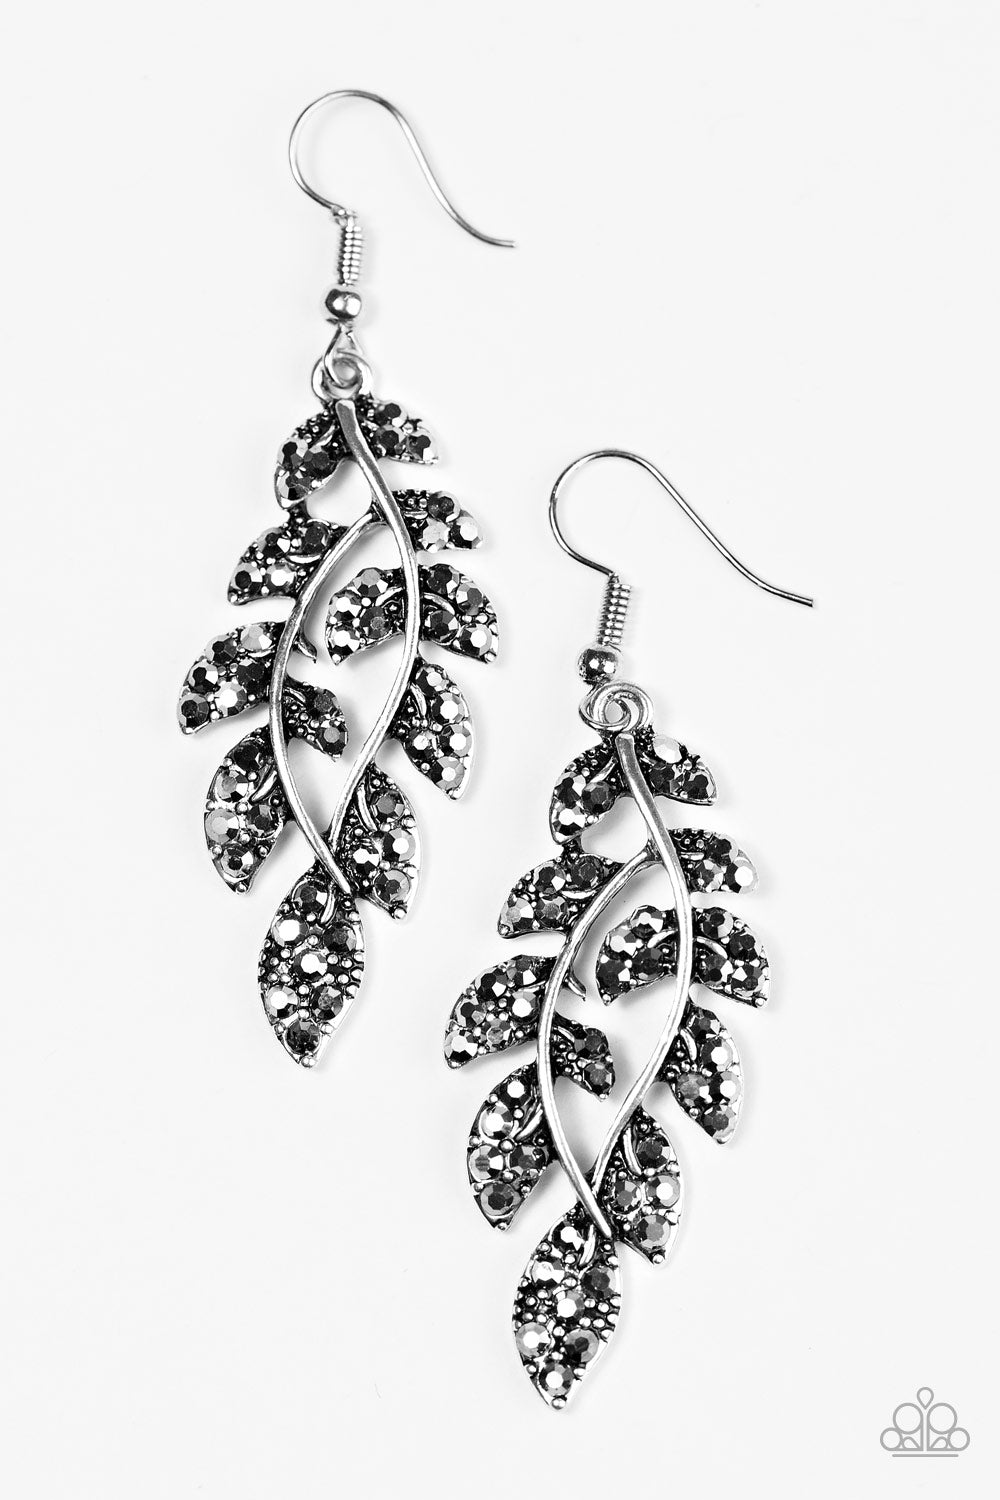 Time WILLOW Tell - Silver - Paparazzi earrings